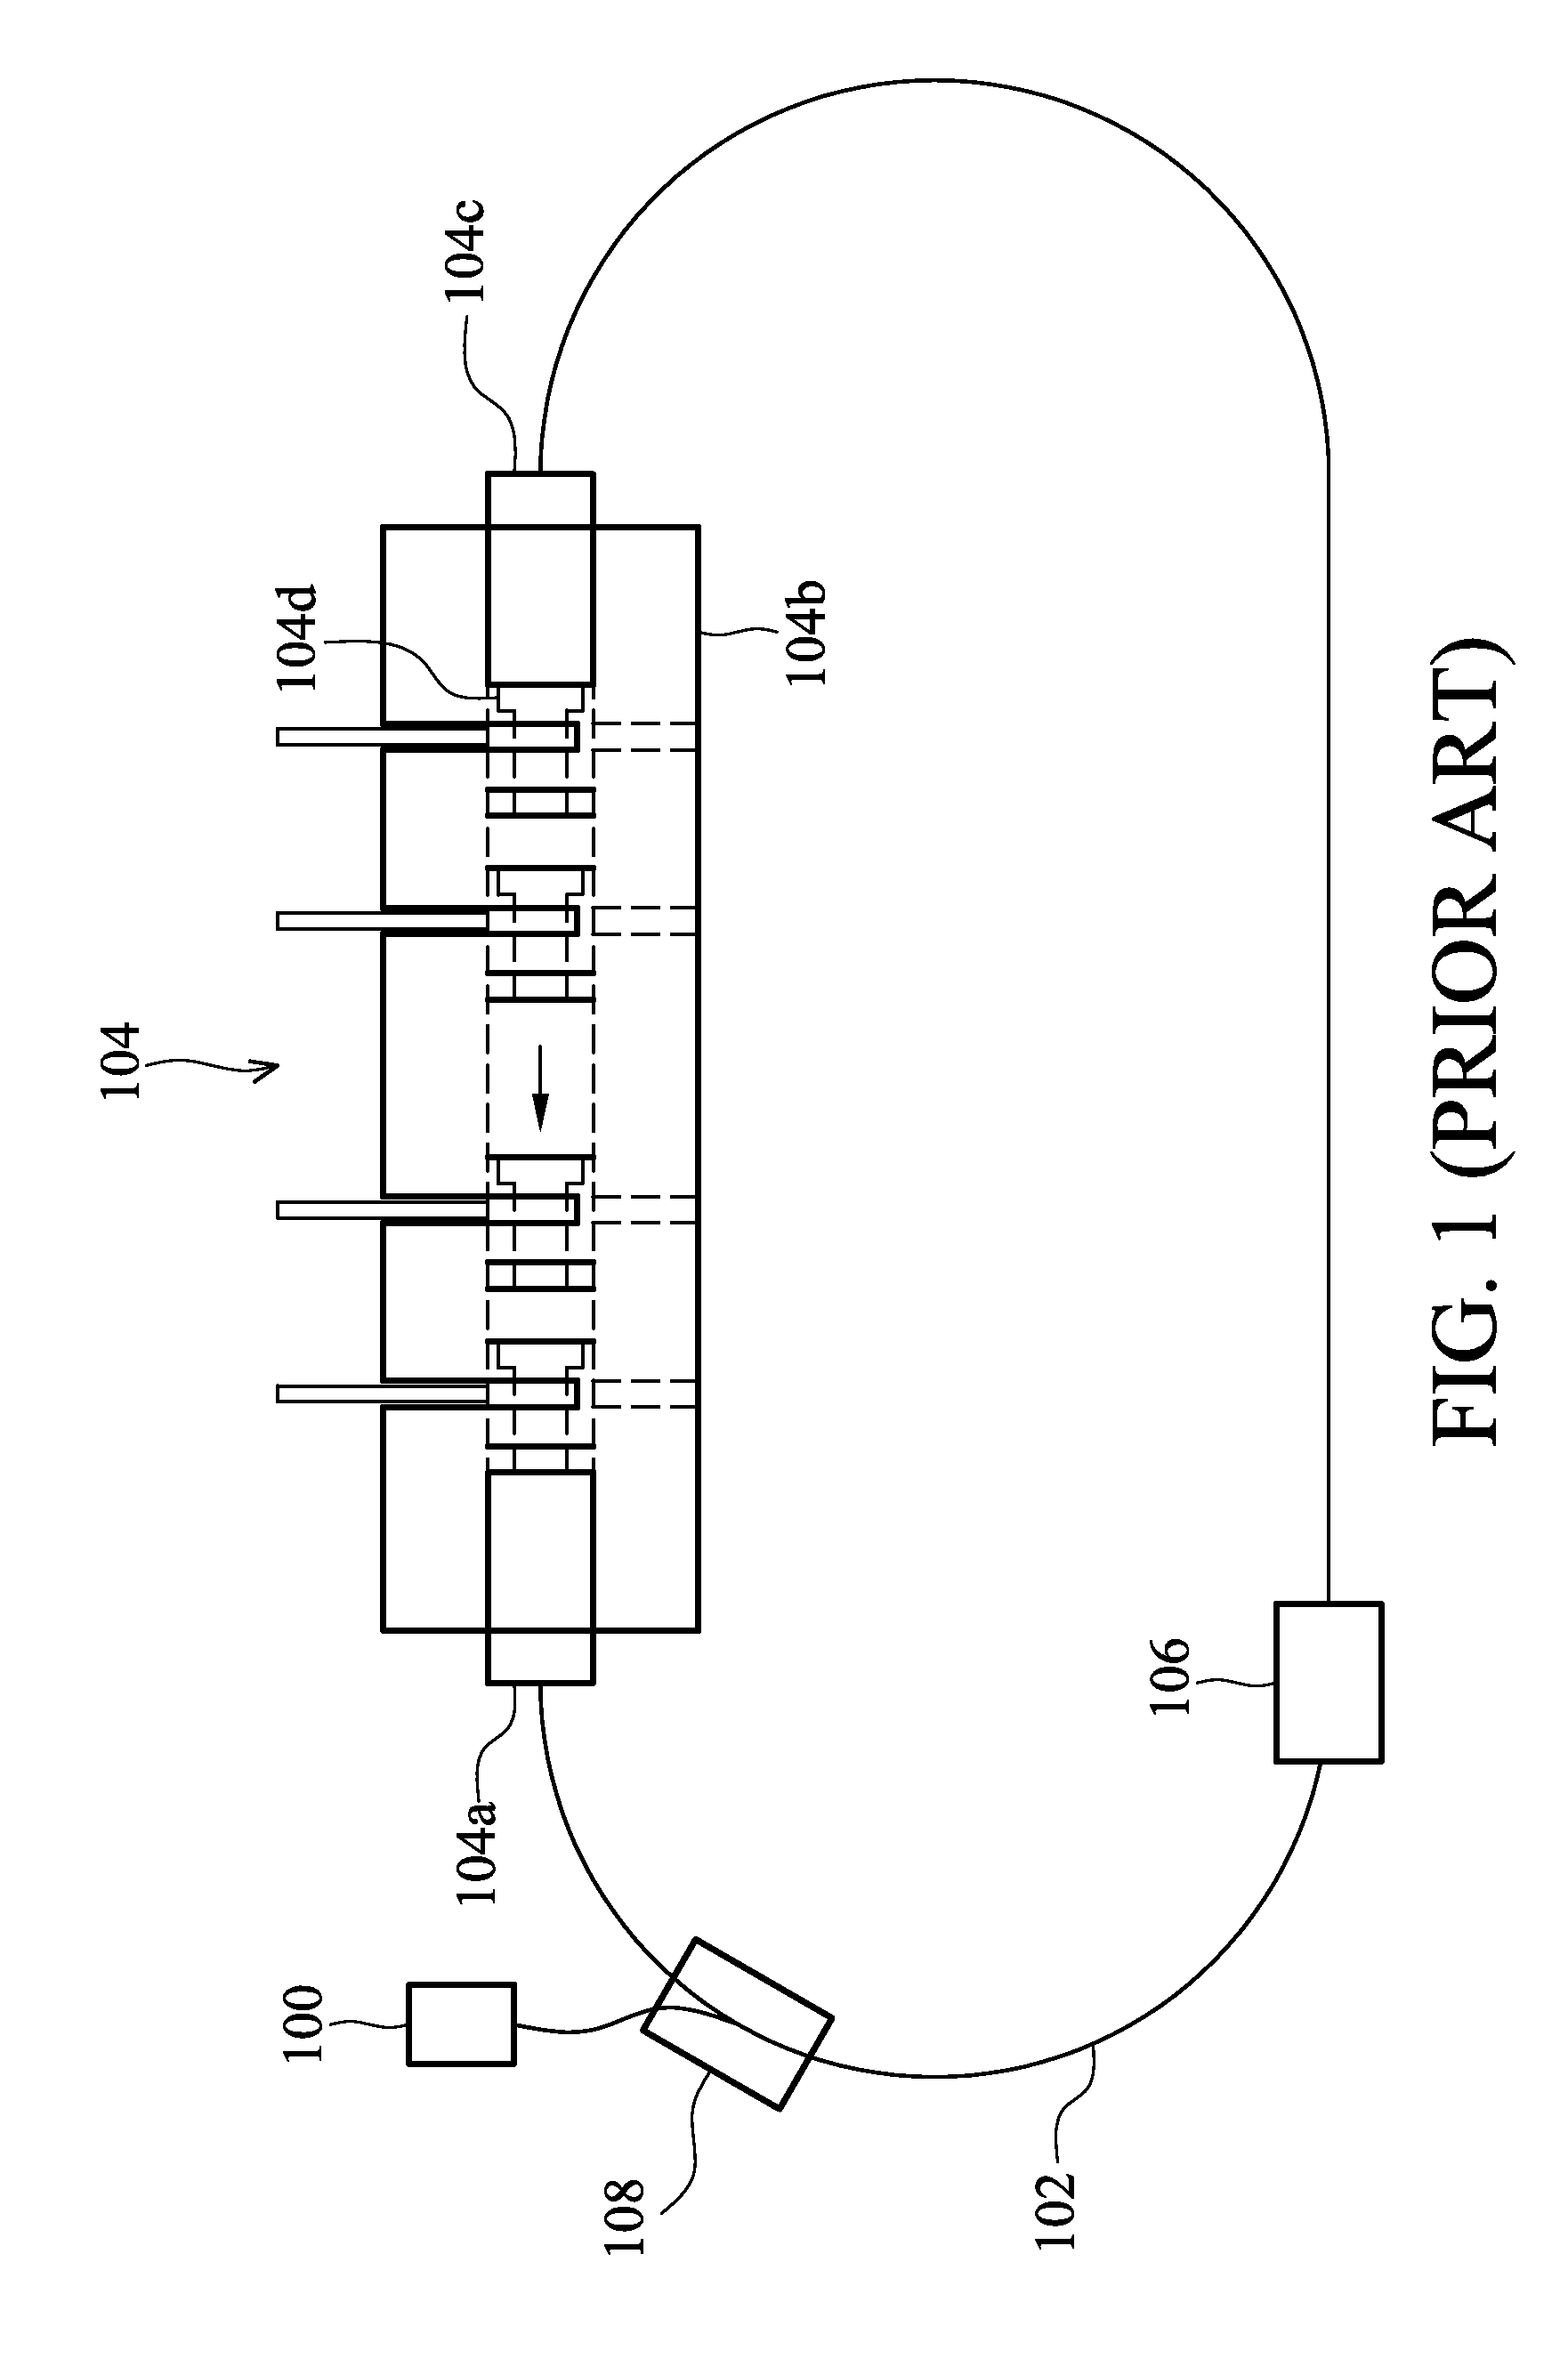 Ring or linear cavity of all-fiber-based ultra short pulse laser system and method of operating the same